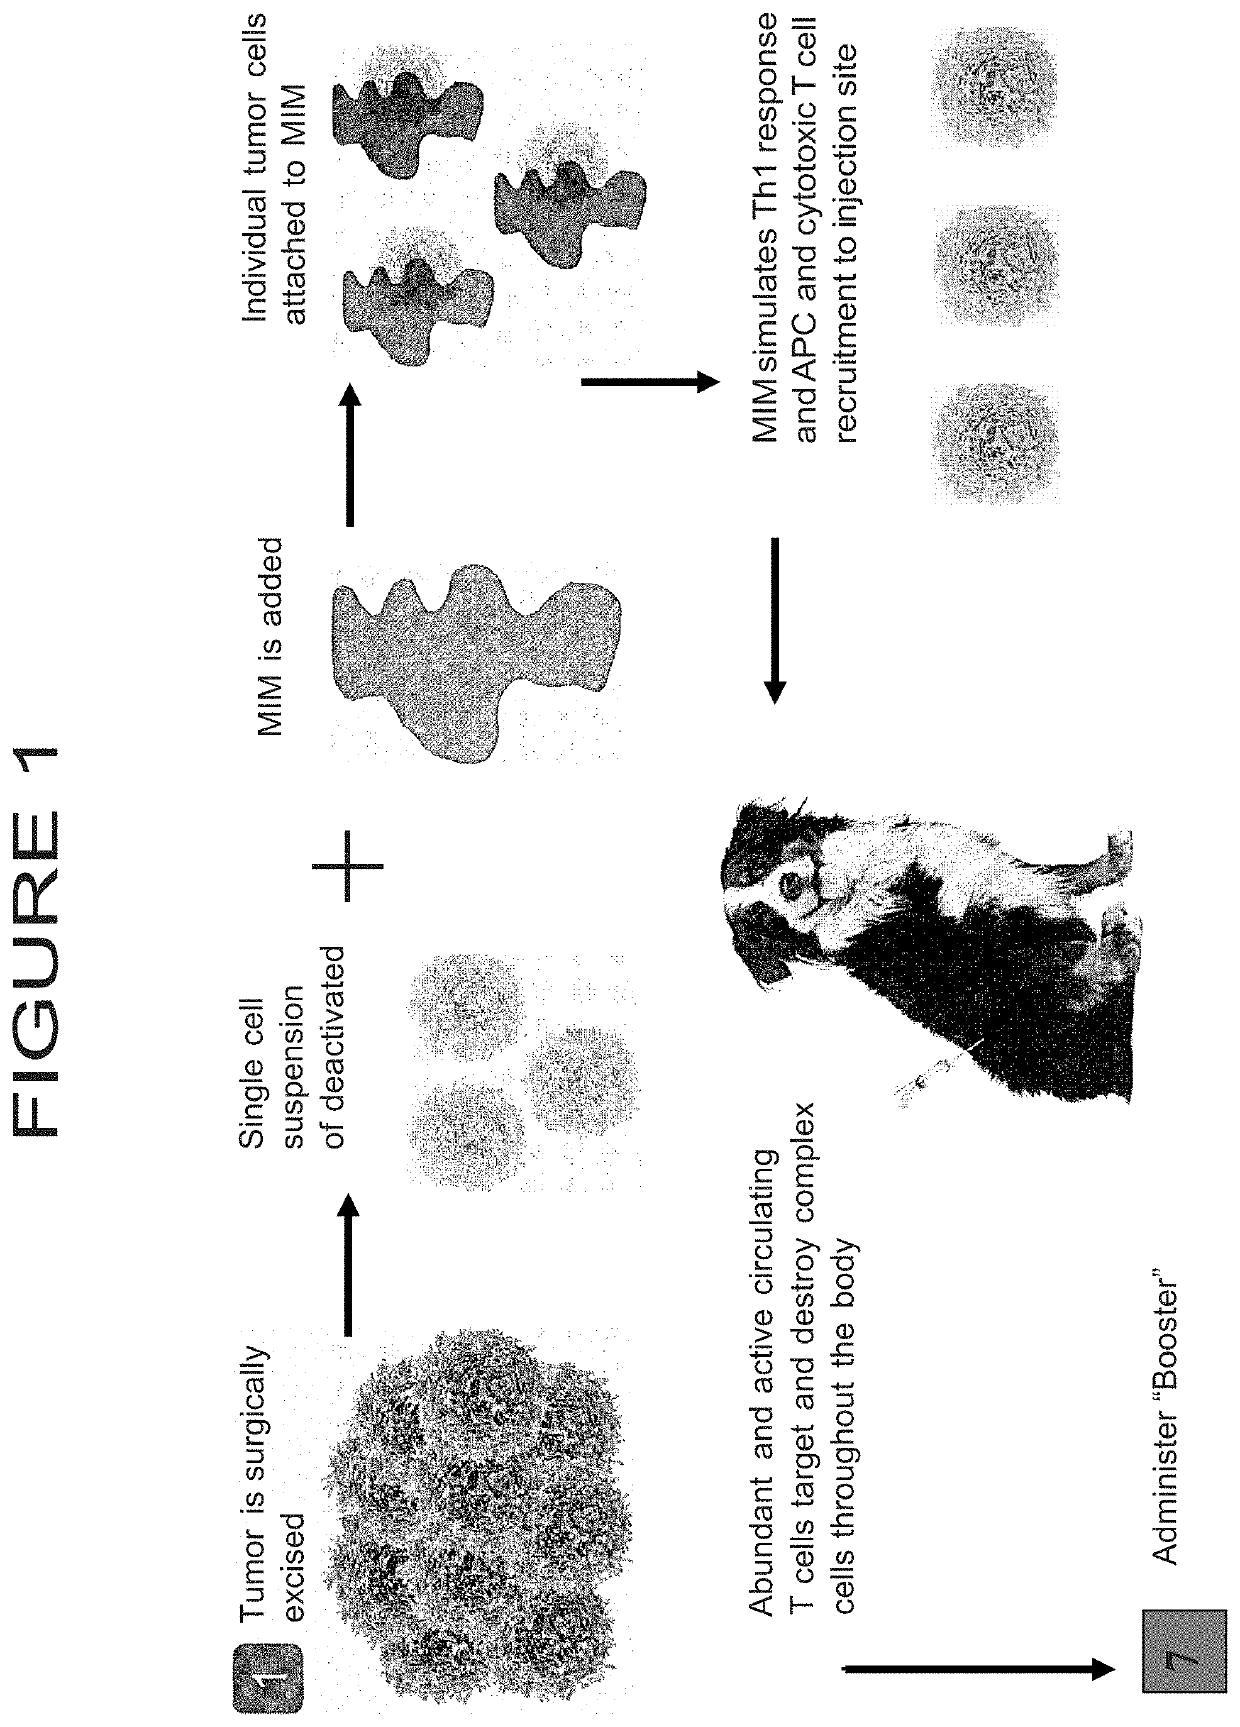 Neoantigen preparations and uses thereof